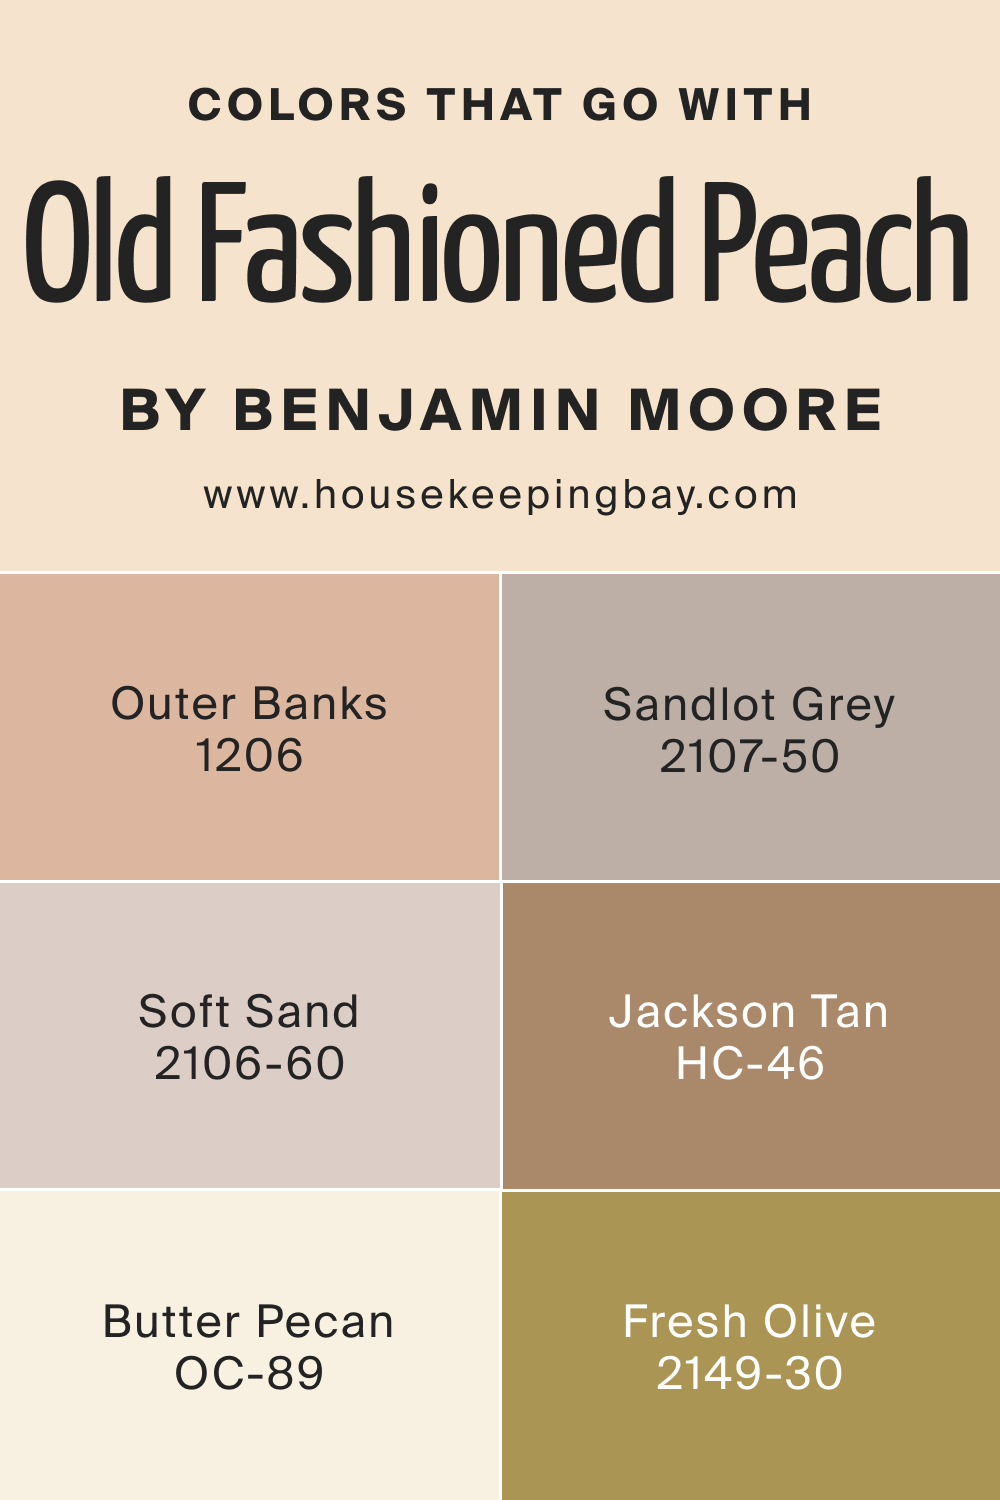 Colors that goes with Old Fashioned Peach OC 79 by Benjamin Moore